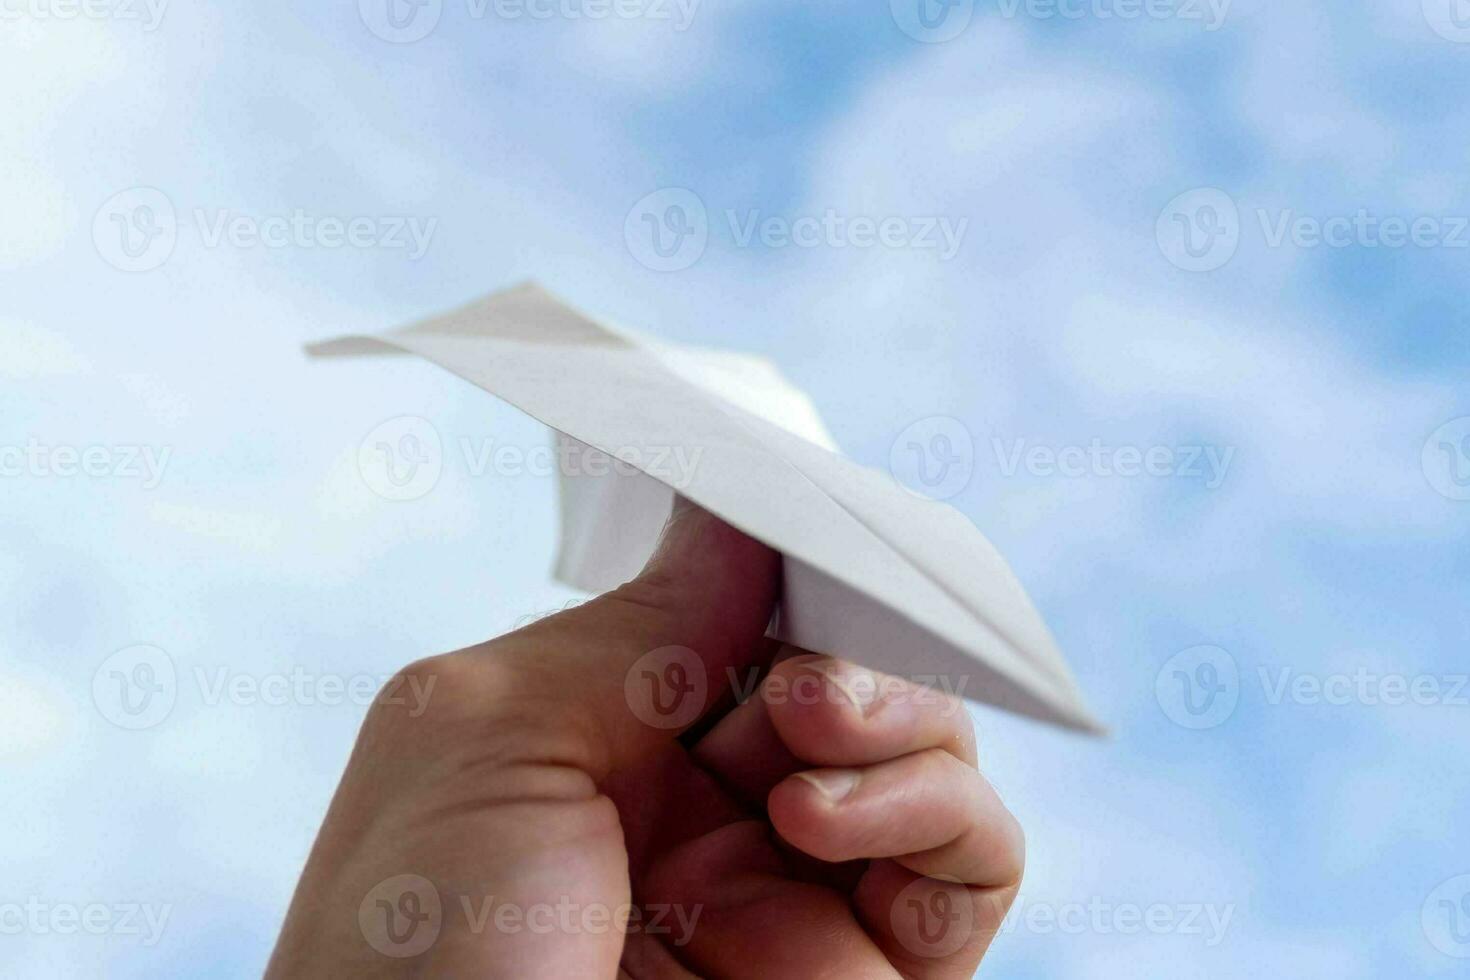 a person holding a paper airplane in the air photo